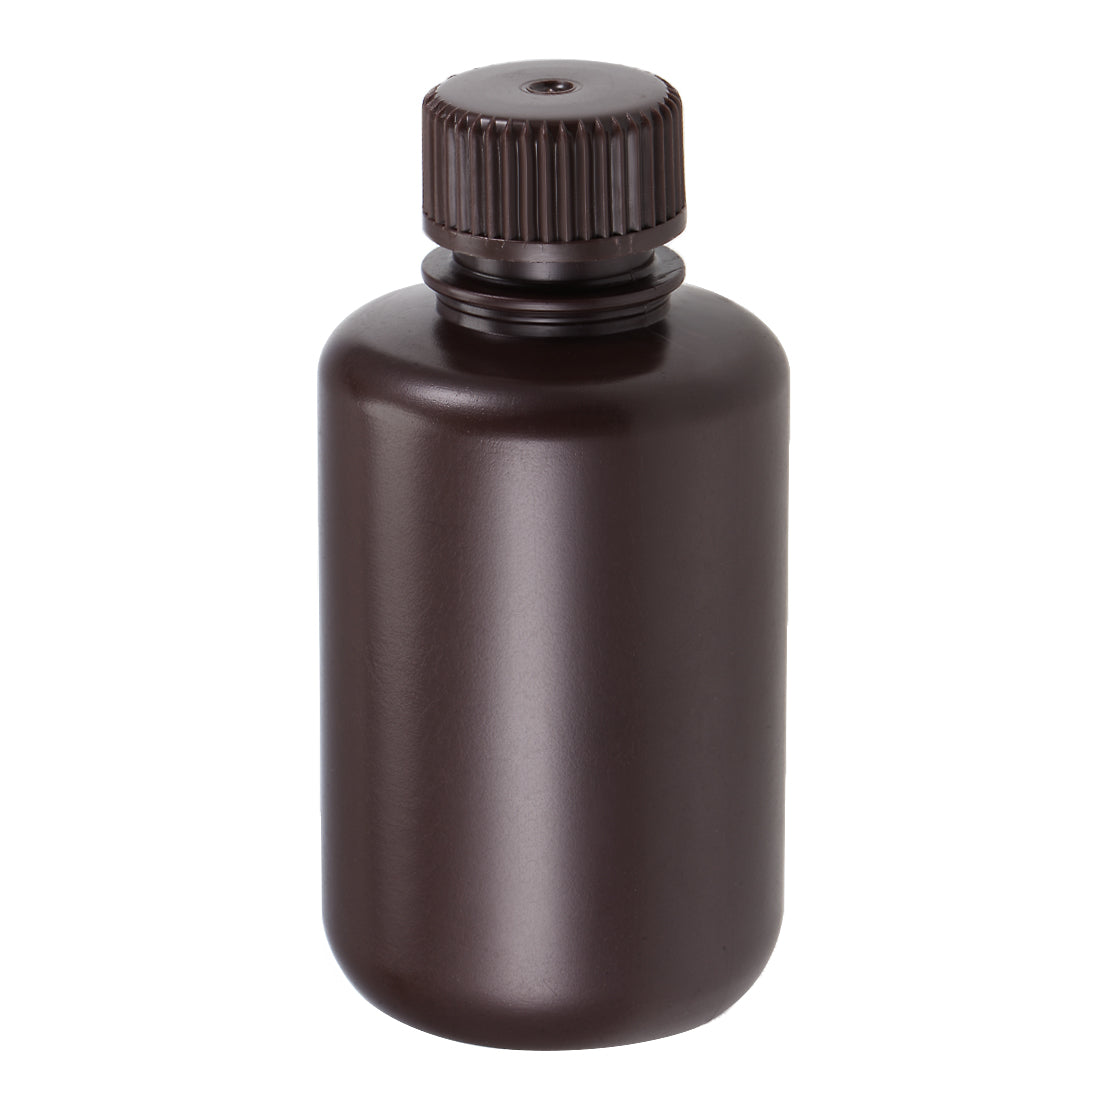 uxcell Uxcell Plastic Lab Chemical Reagent Bottle 125ml/4.2oz Small Mouth Sample Sealing Liquid Storage Container Brown